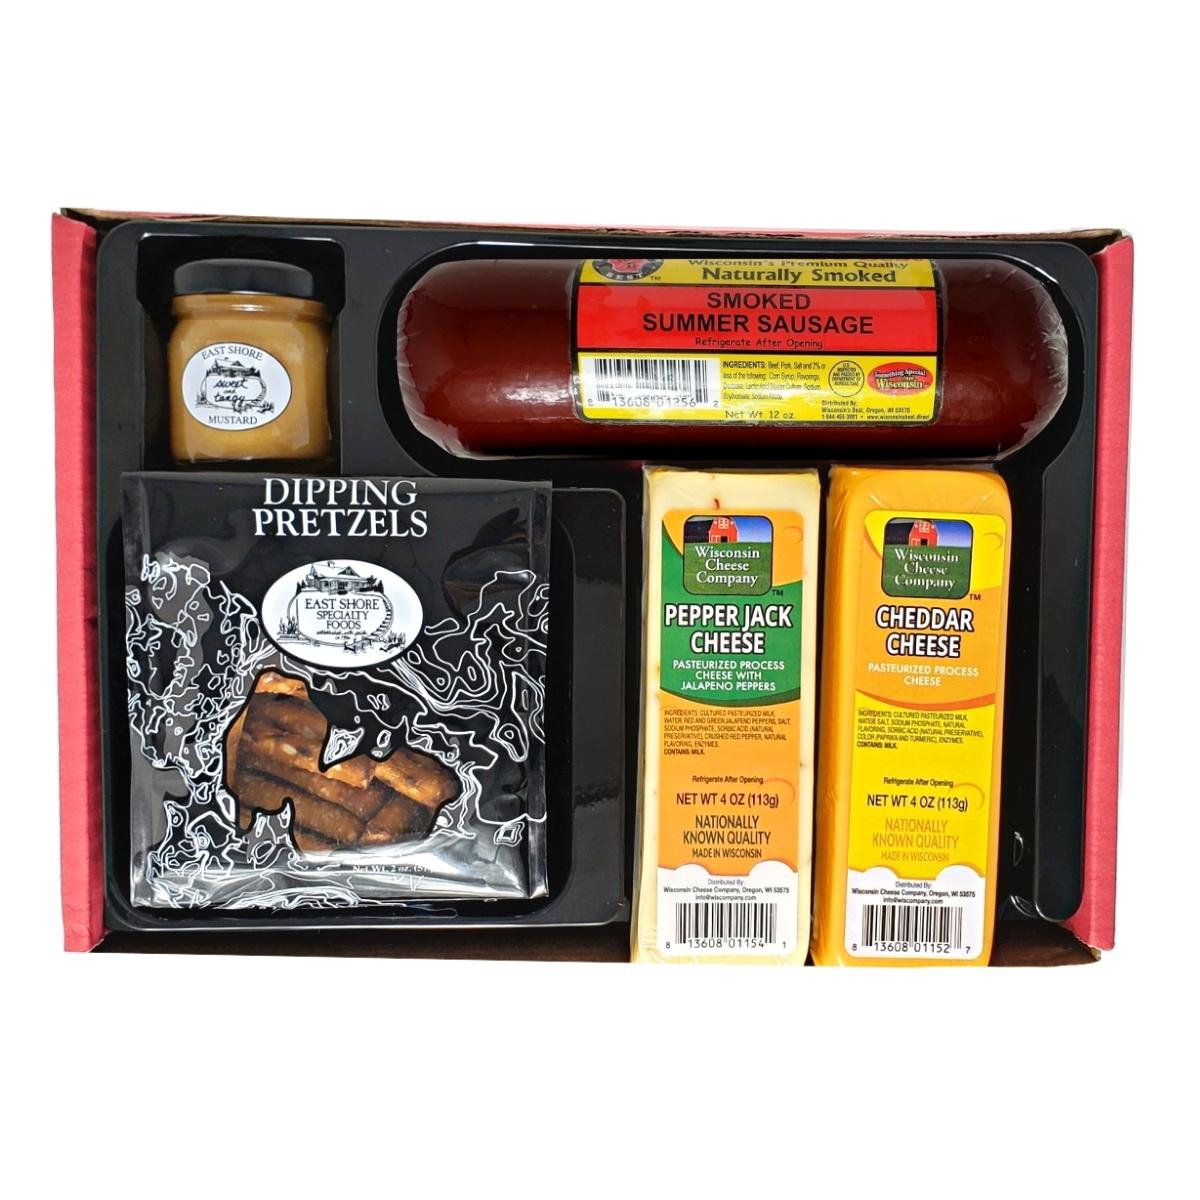 Wisconsin's Best Wisconsin Cheese Company's Gourmet Wisconsin Cheese, Sausage And Dipping Pretzel Gift Basket, Assort In Assorted Pre- Pack